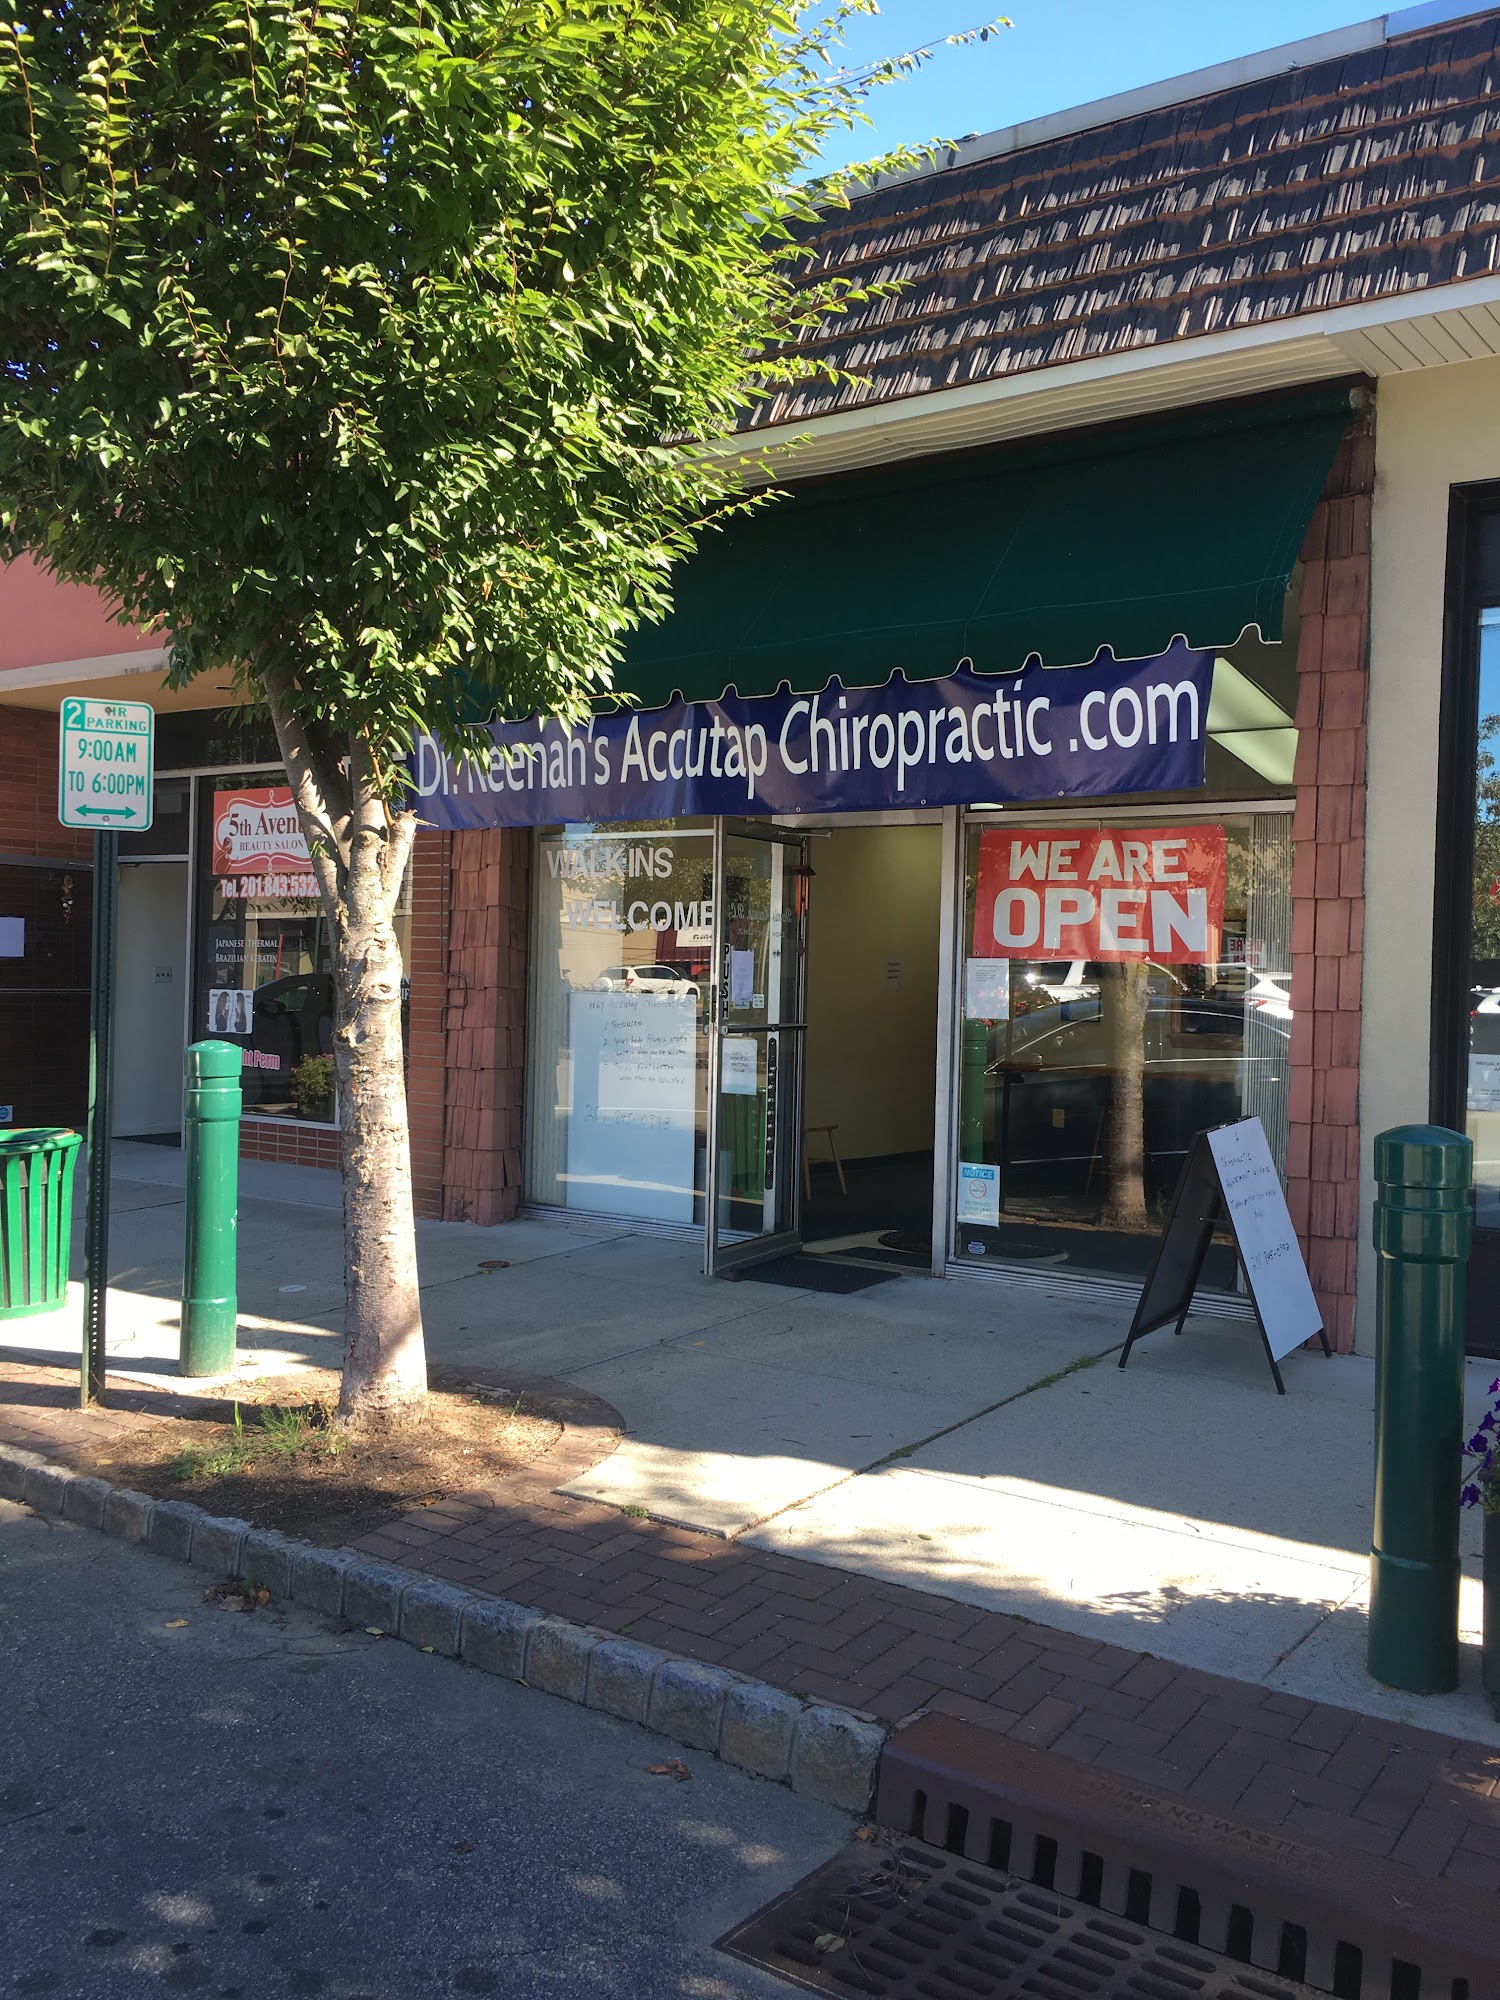 Dr. Keenan's Accutap Chiropractic 51 W Pleasant Ave, Maywood New Jersey 07607